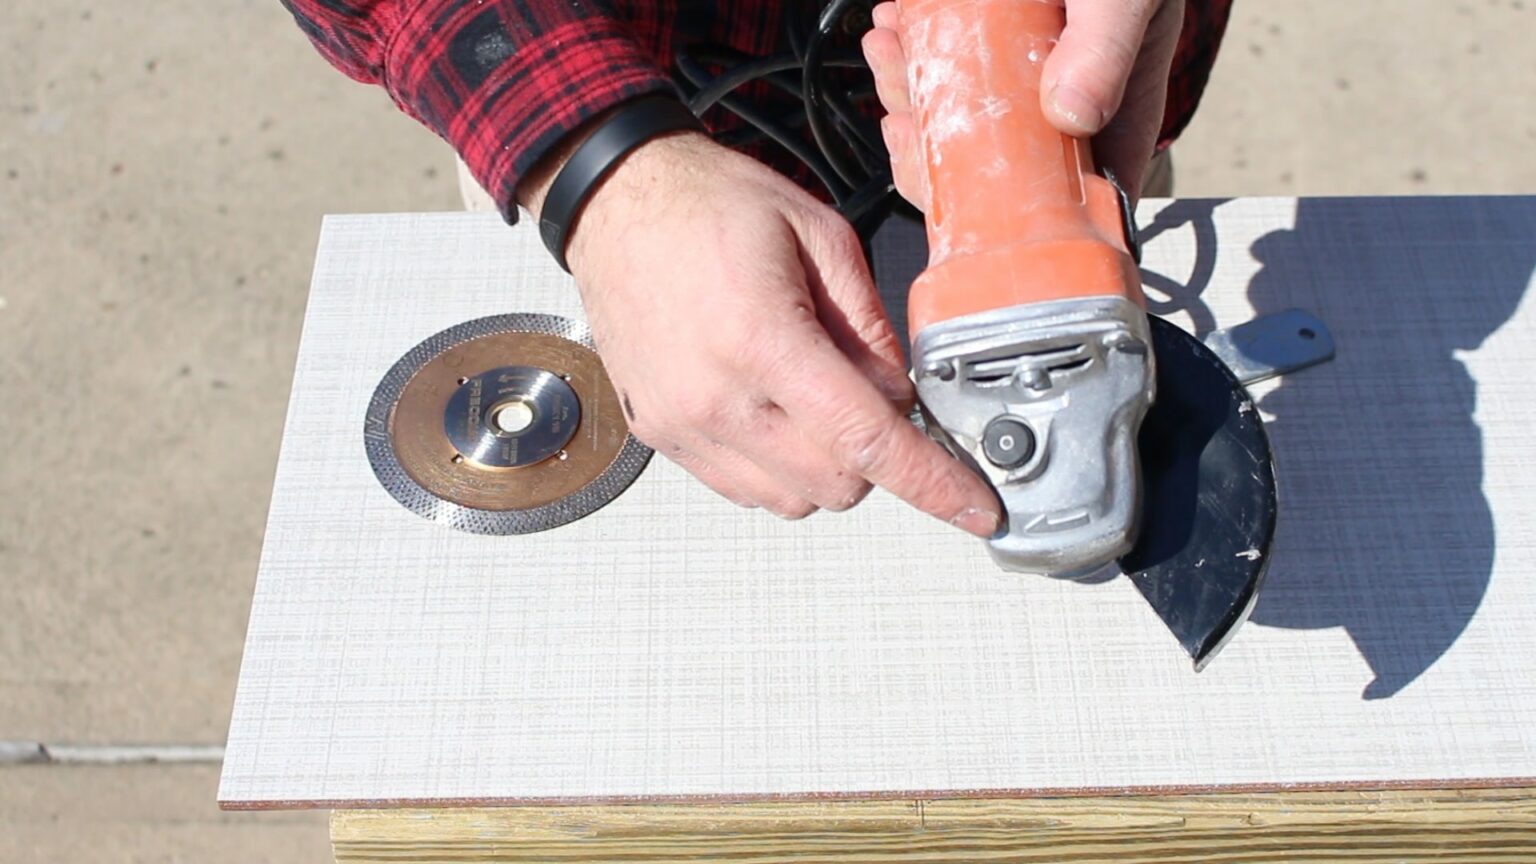 Cutting Bathroom Tiles with Montolit's CGX115 Angle Grinder Blade ...